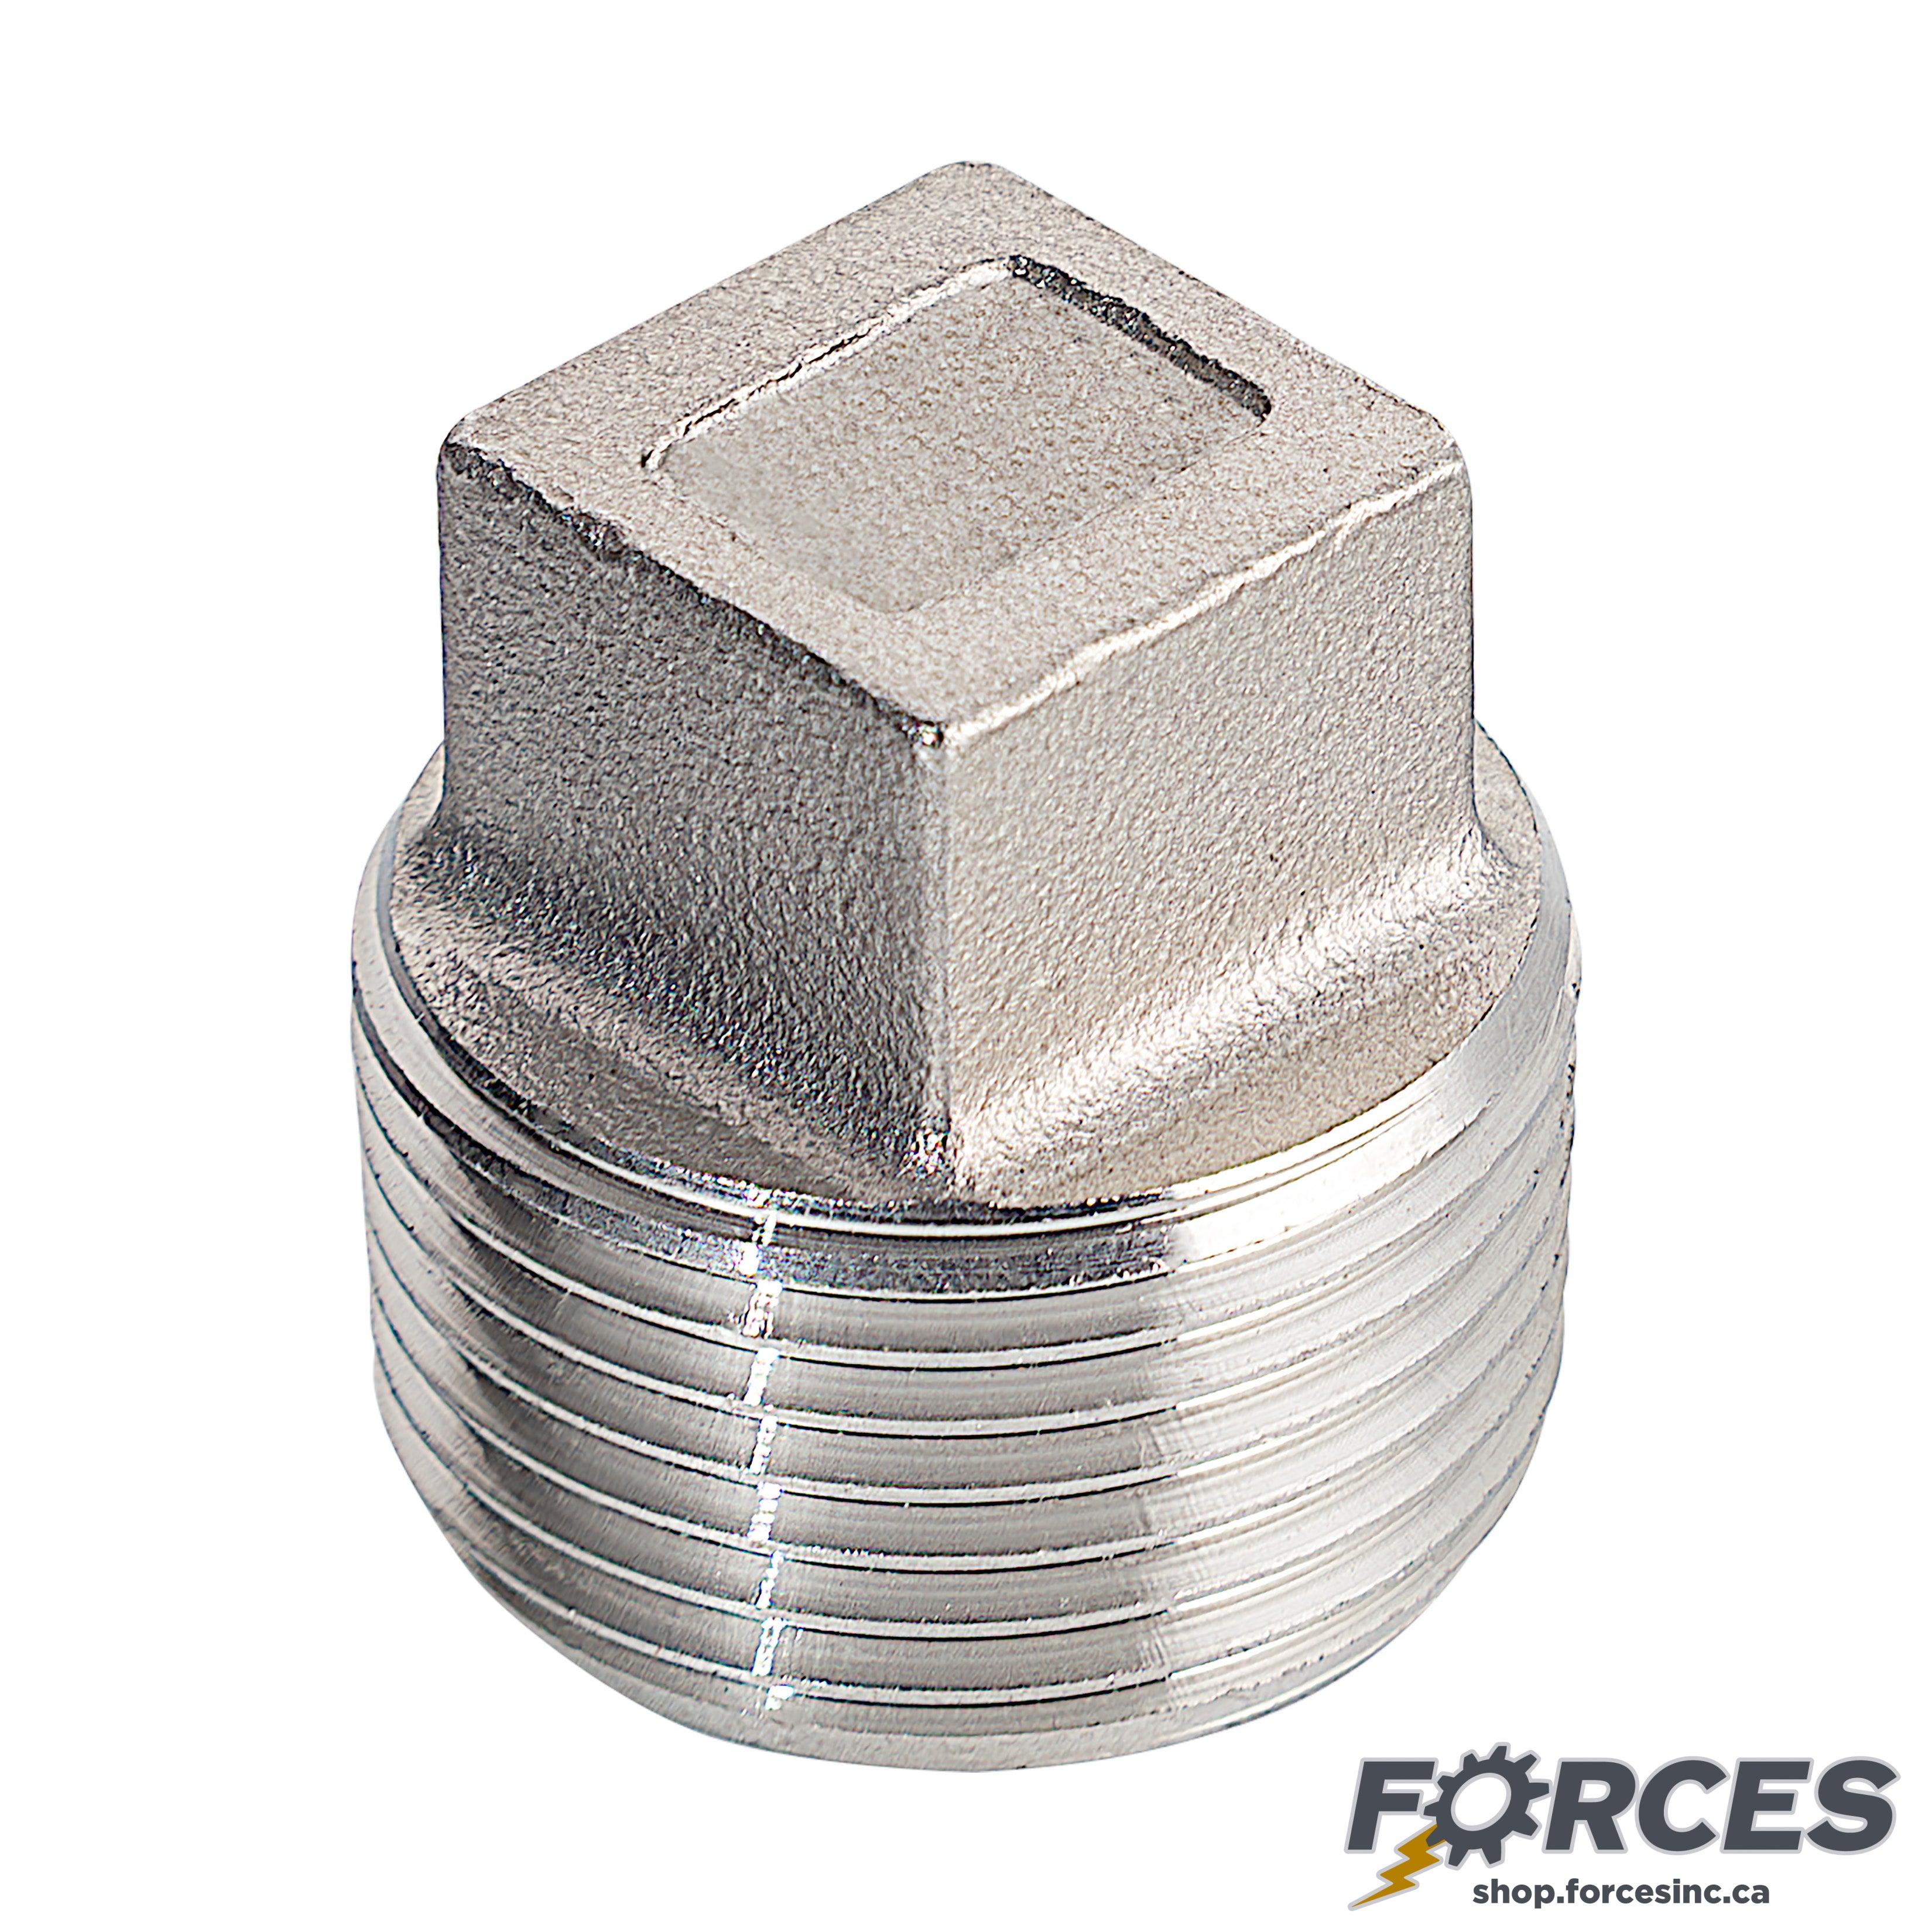 3/8" Square Plug NPT #150 - Stainless Steel 304 - Forces Inc